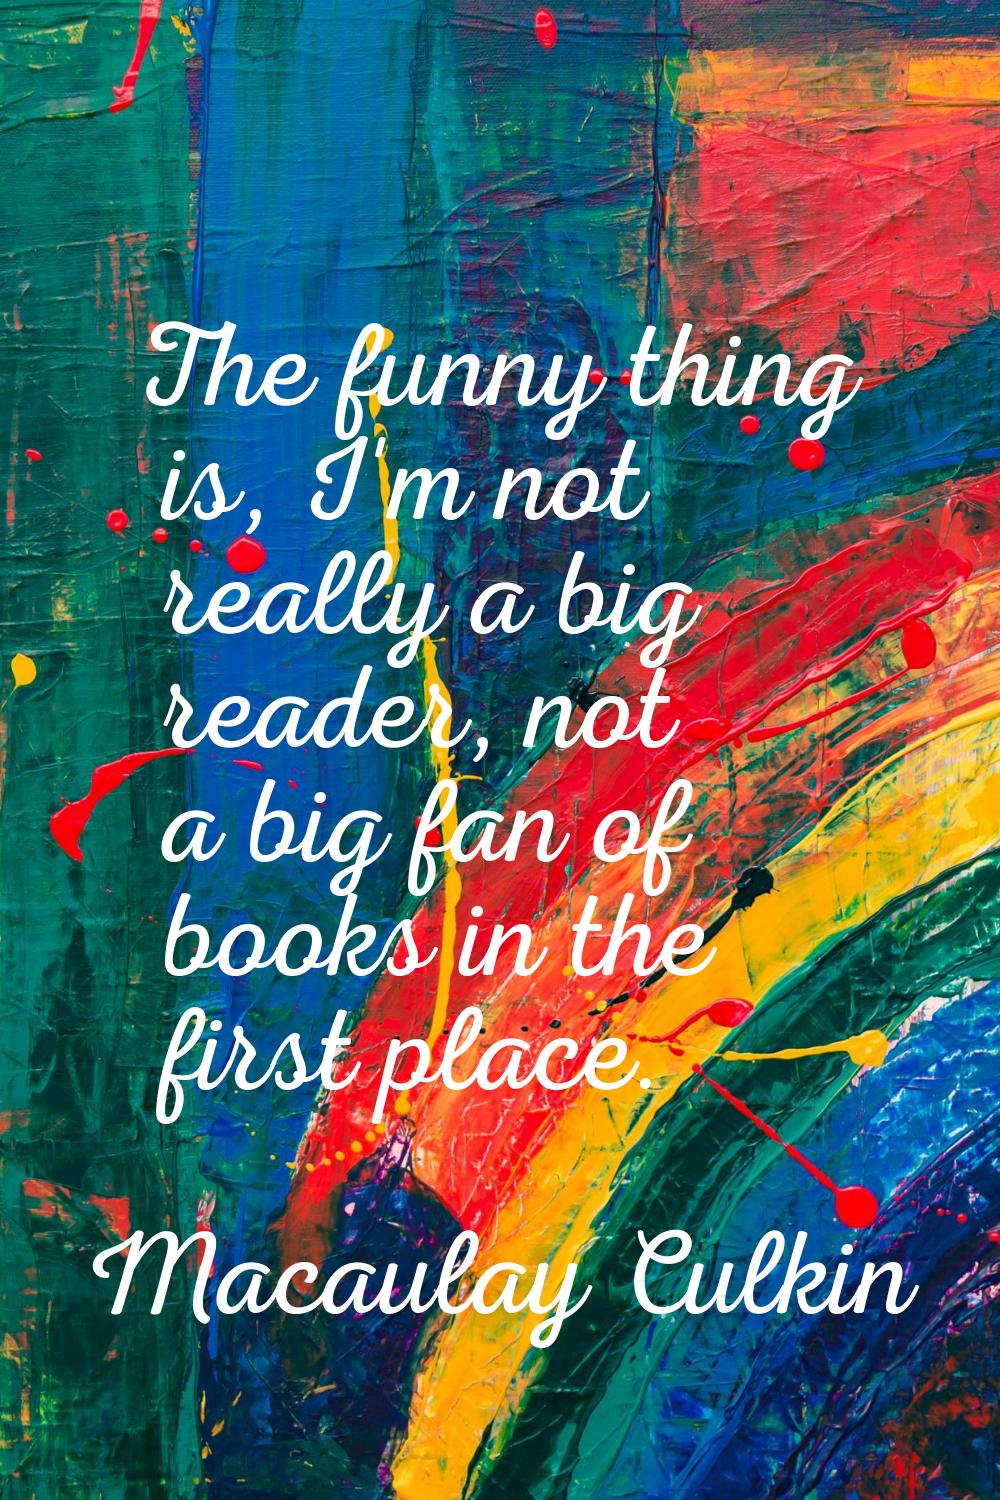 The funny thing is, I'm not really a big reader, not a big fan of books in the first place.